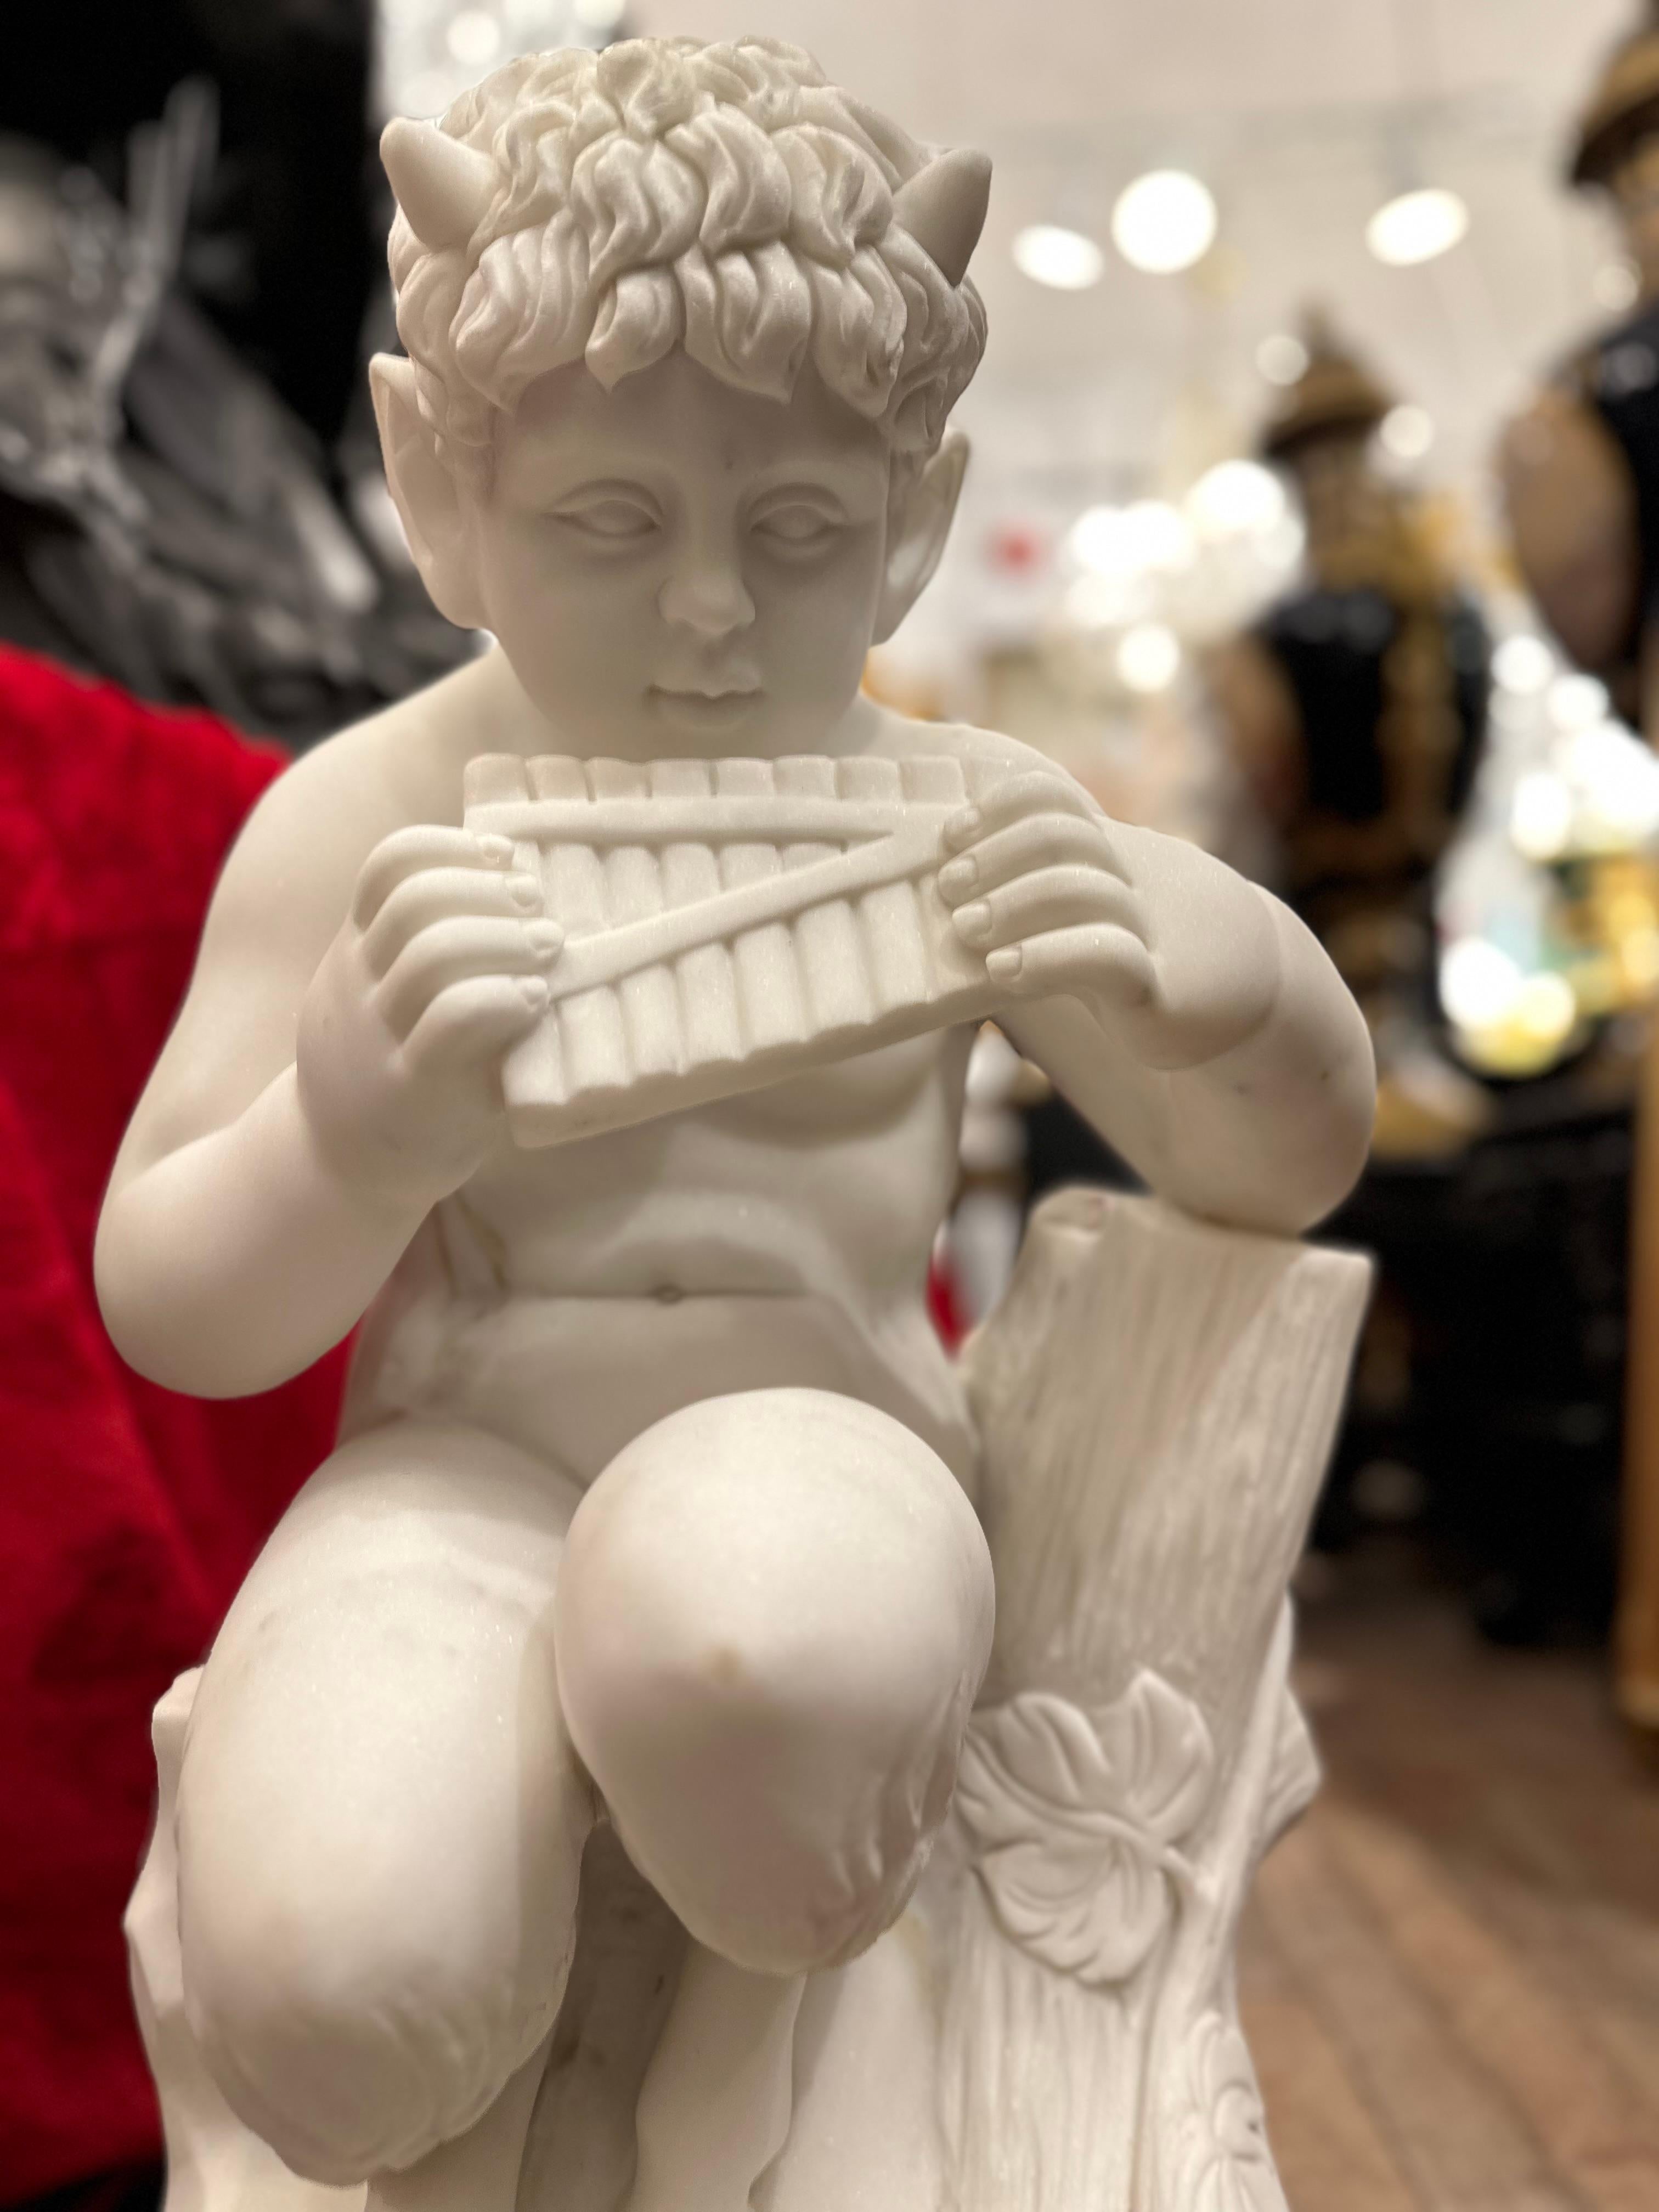 Beautifully and carefully carved Marble Statue of Pan playing a flute. The features are clearly visible and well done, with Pan pursing his lips to blow into the flute. A lovely realistic portrayal of Pan which even includes the dimples on his lower